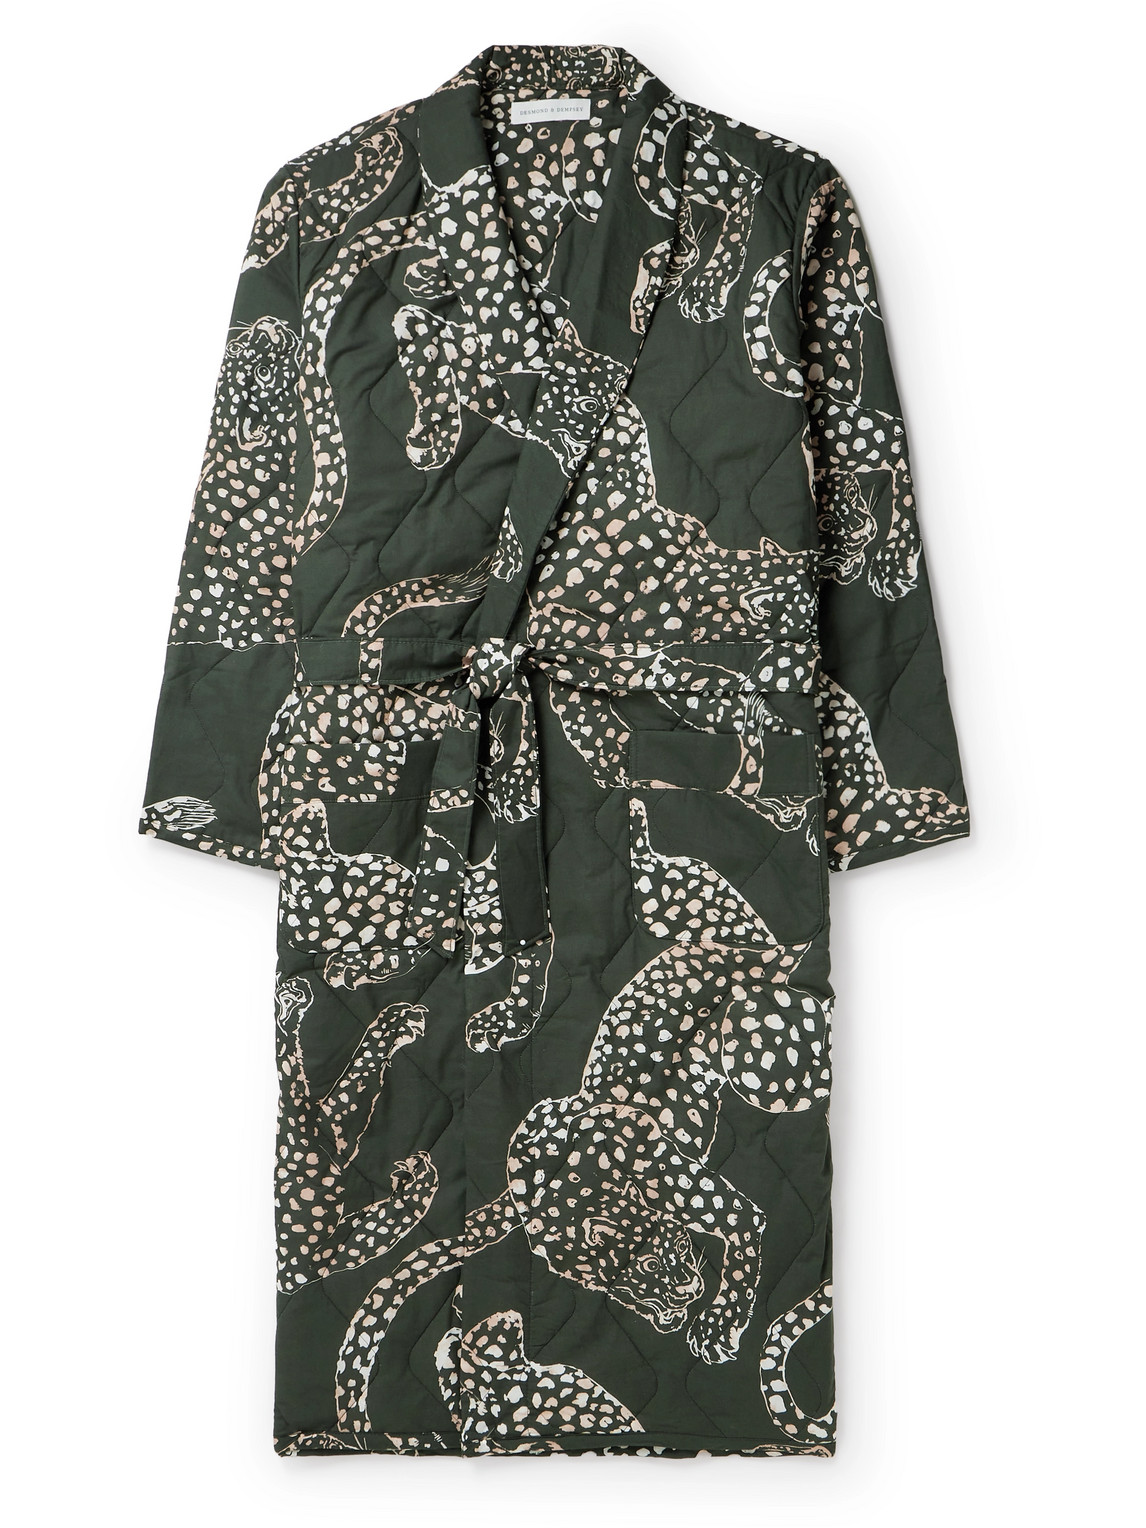 Desmond & Dempsey Quilted Printed Cotton Robe In Green